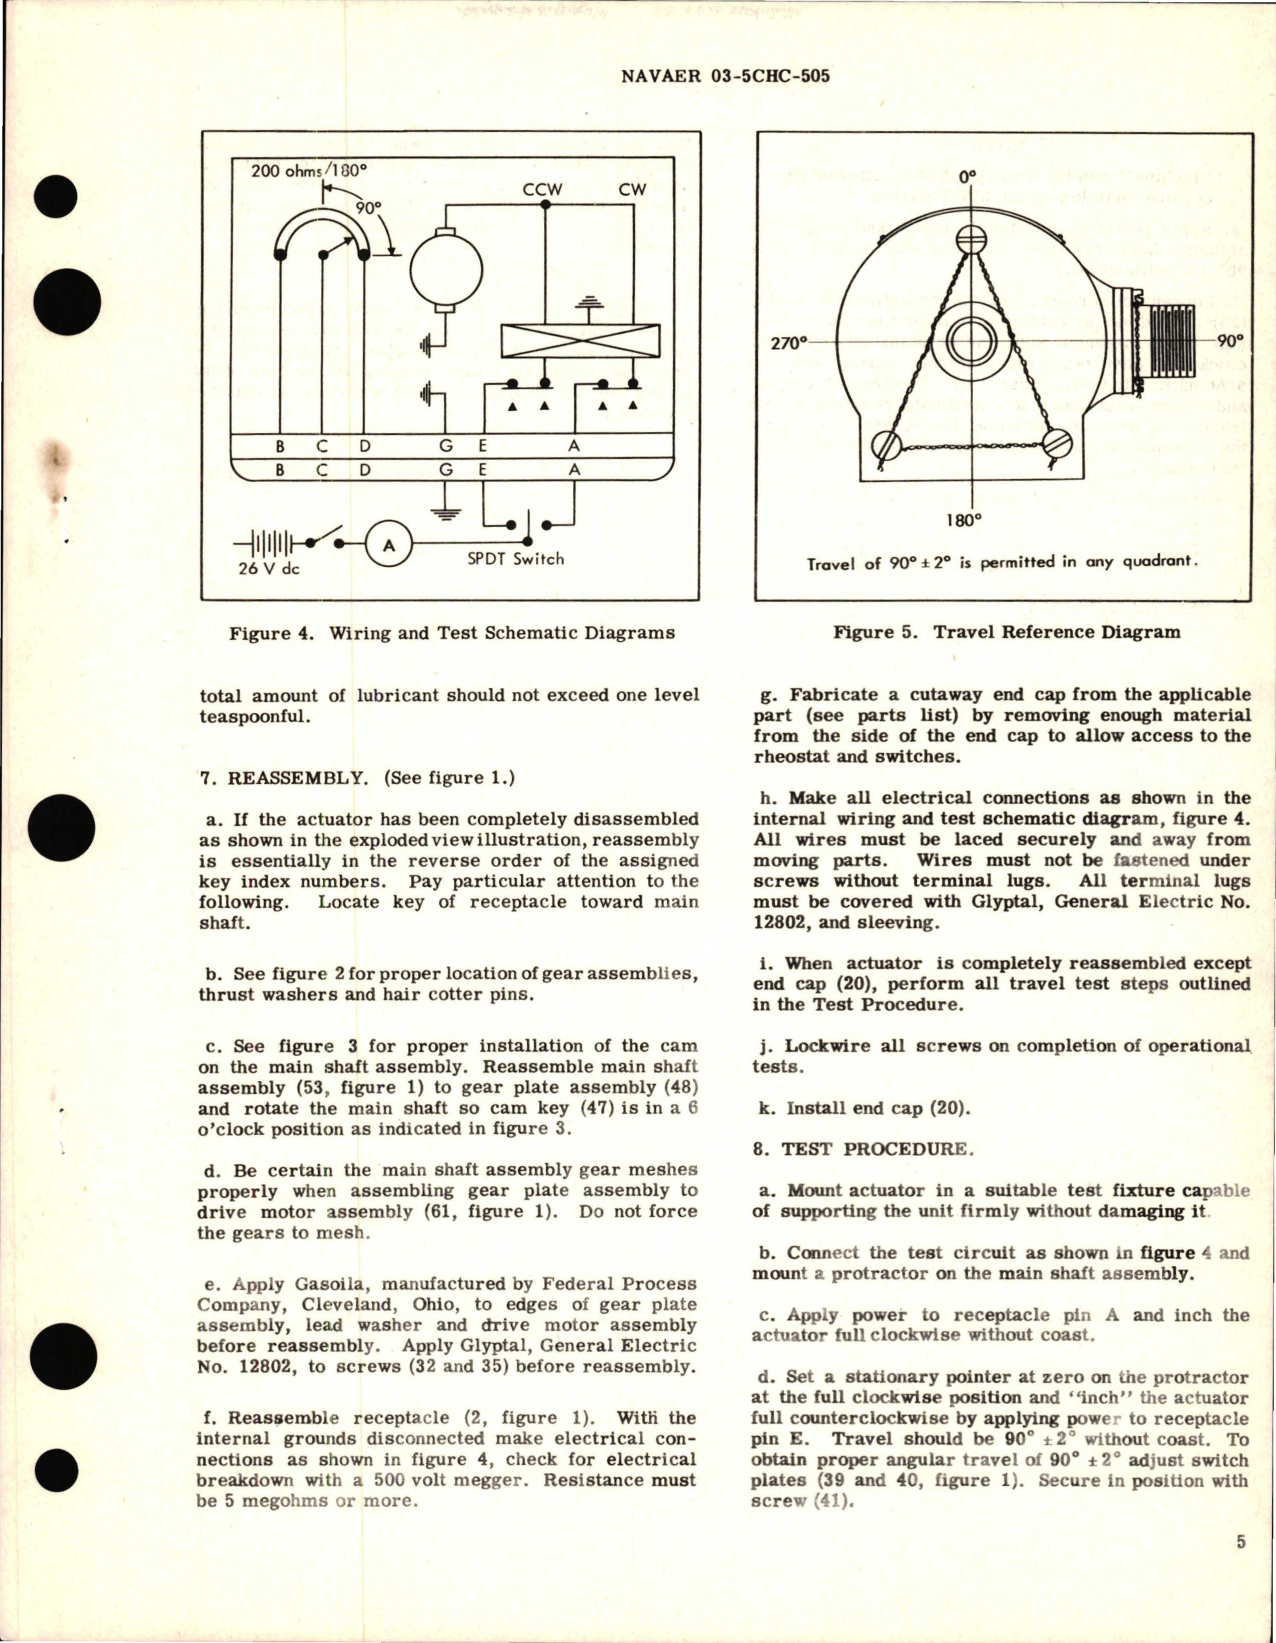 Sample page 5 from AirCorps Library document: Overhaul Instructions with Parts Breakdown for Rotary Actuator - FYLC 2981, FYLC 2981-1 and FYLC-2981-2 